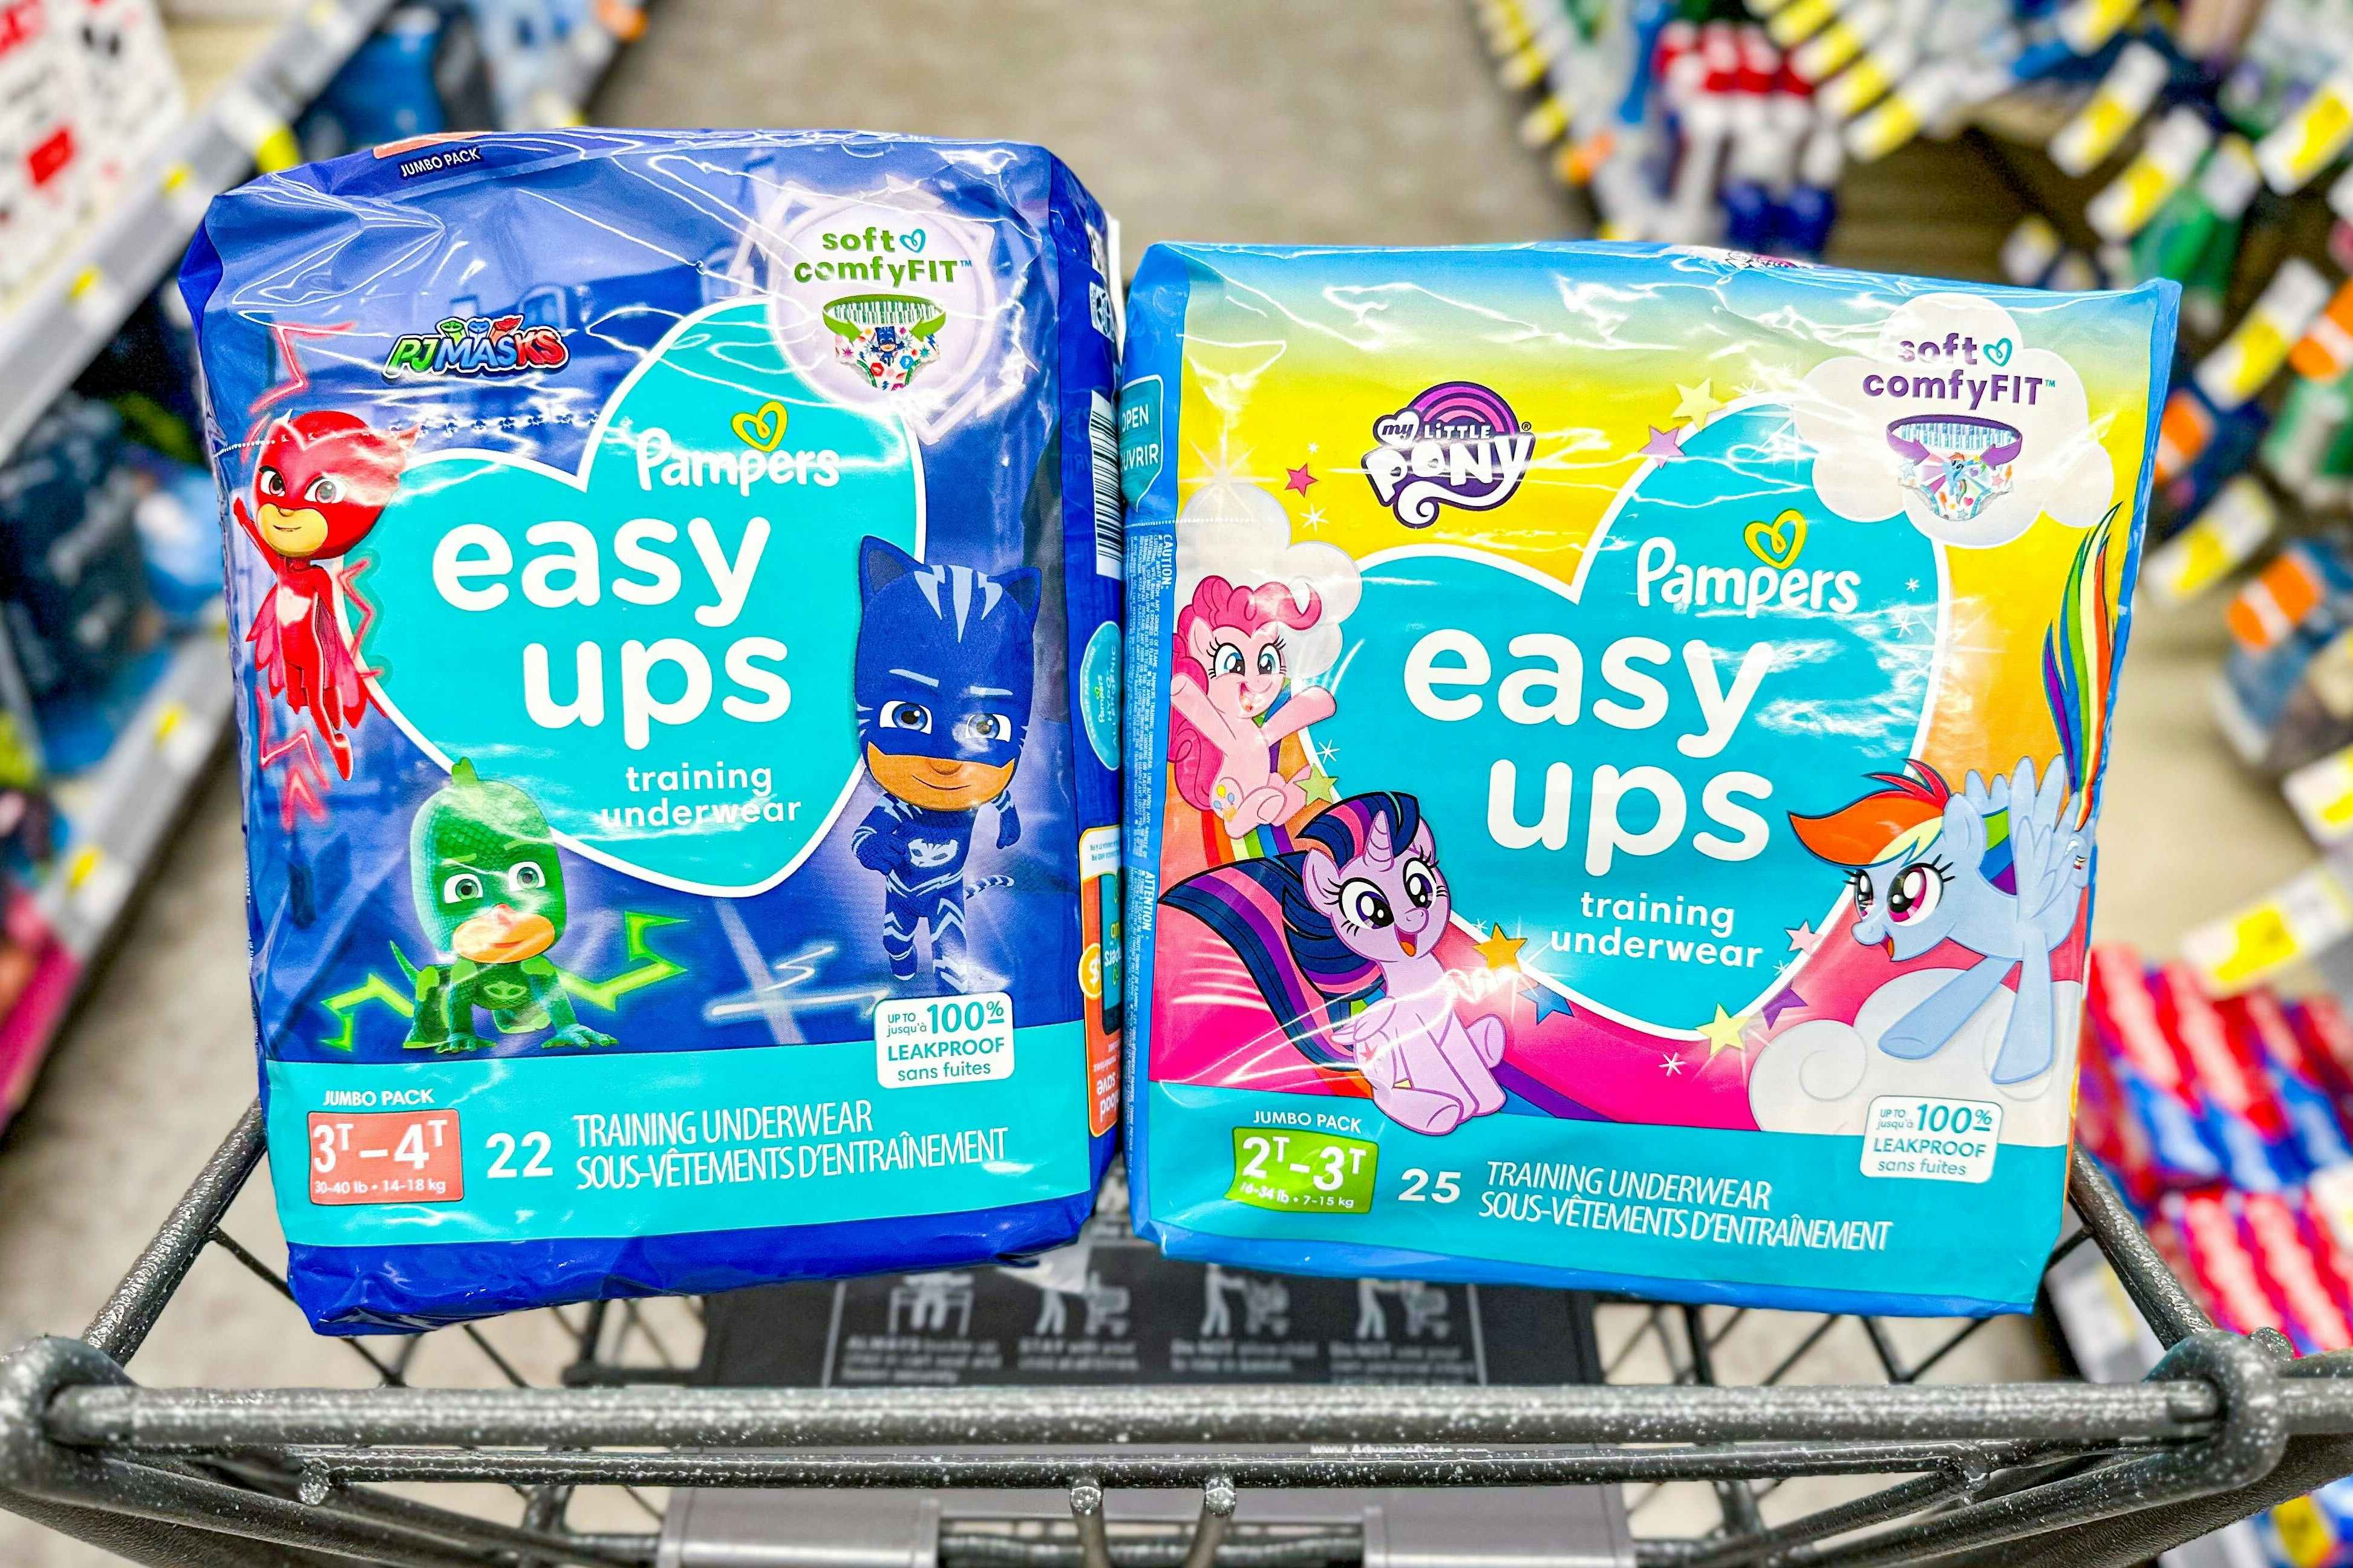 Pampers Easy Ups, as Low as $1.43 at Walgreens